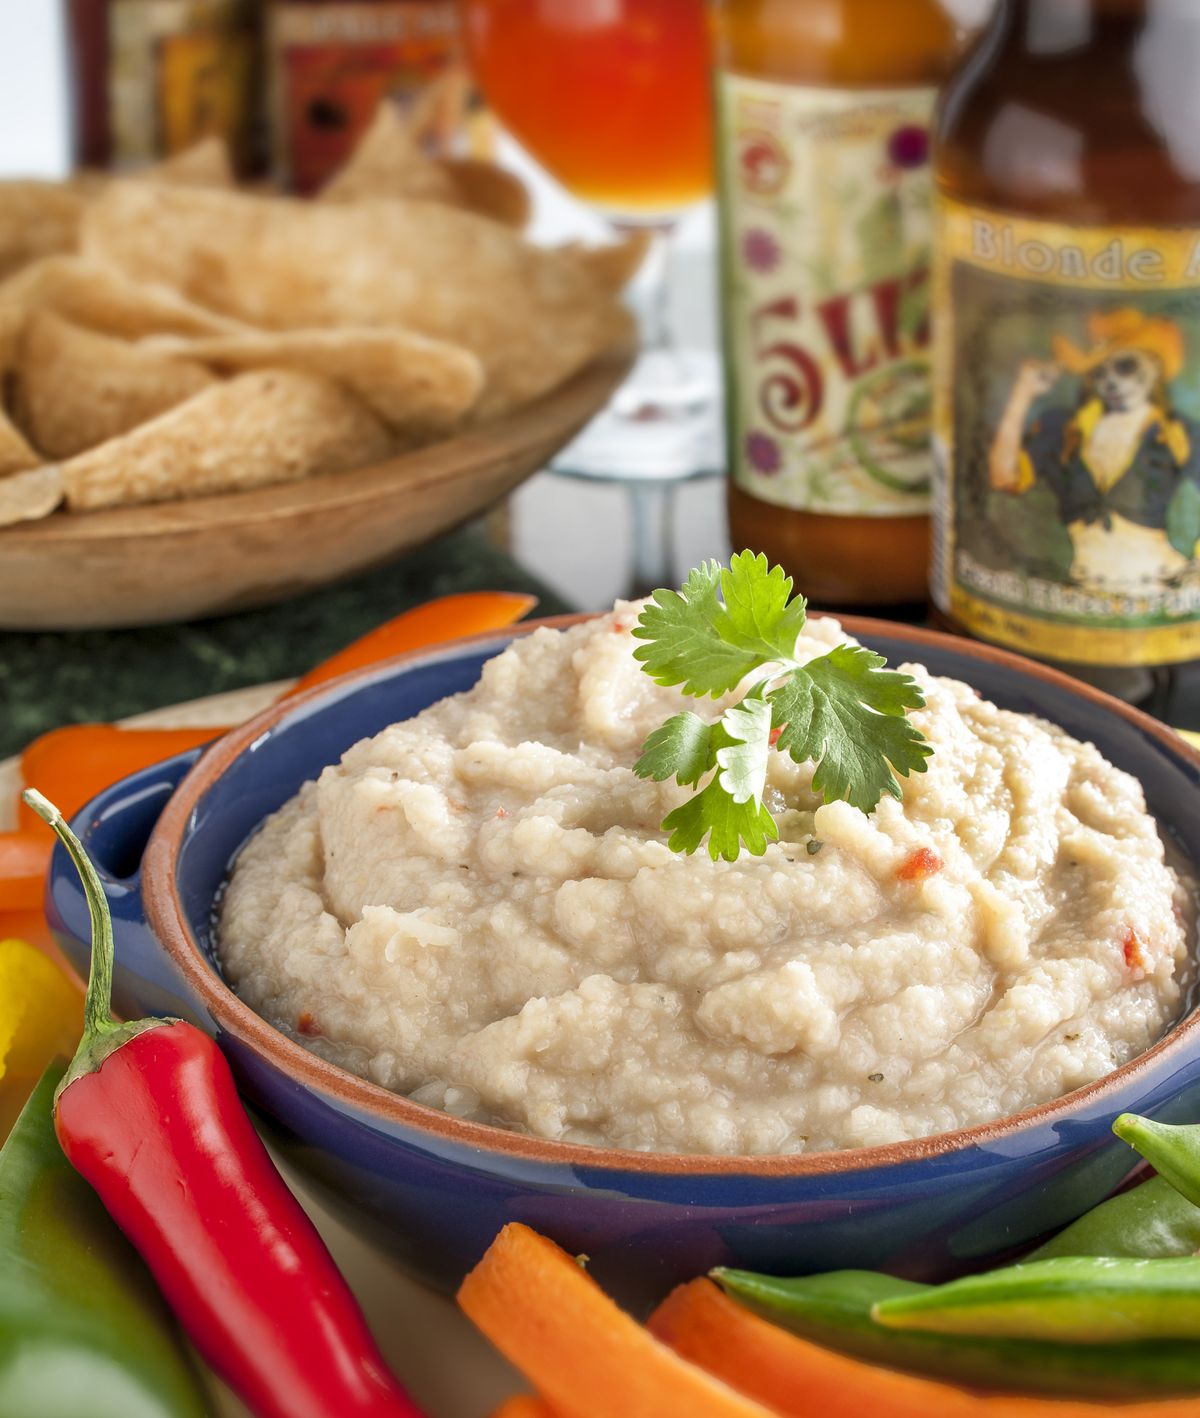 This spicy dip is made with tepary beans, a variety native to Arizona.